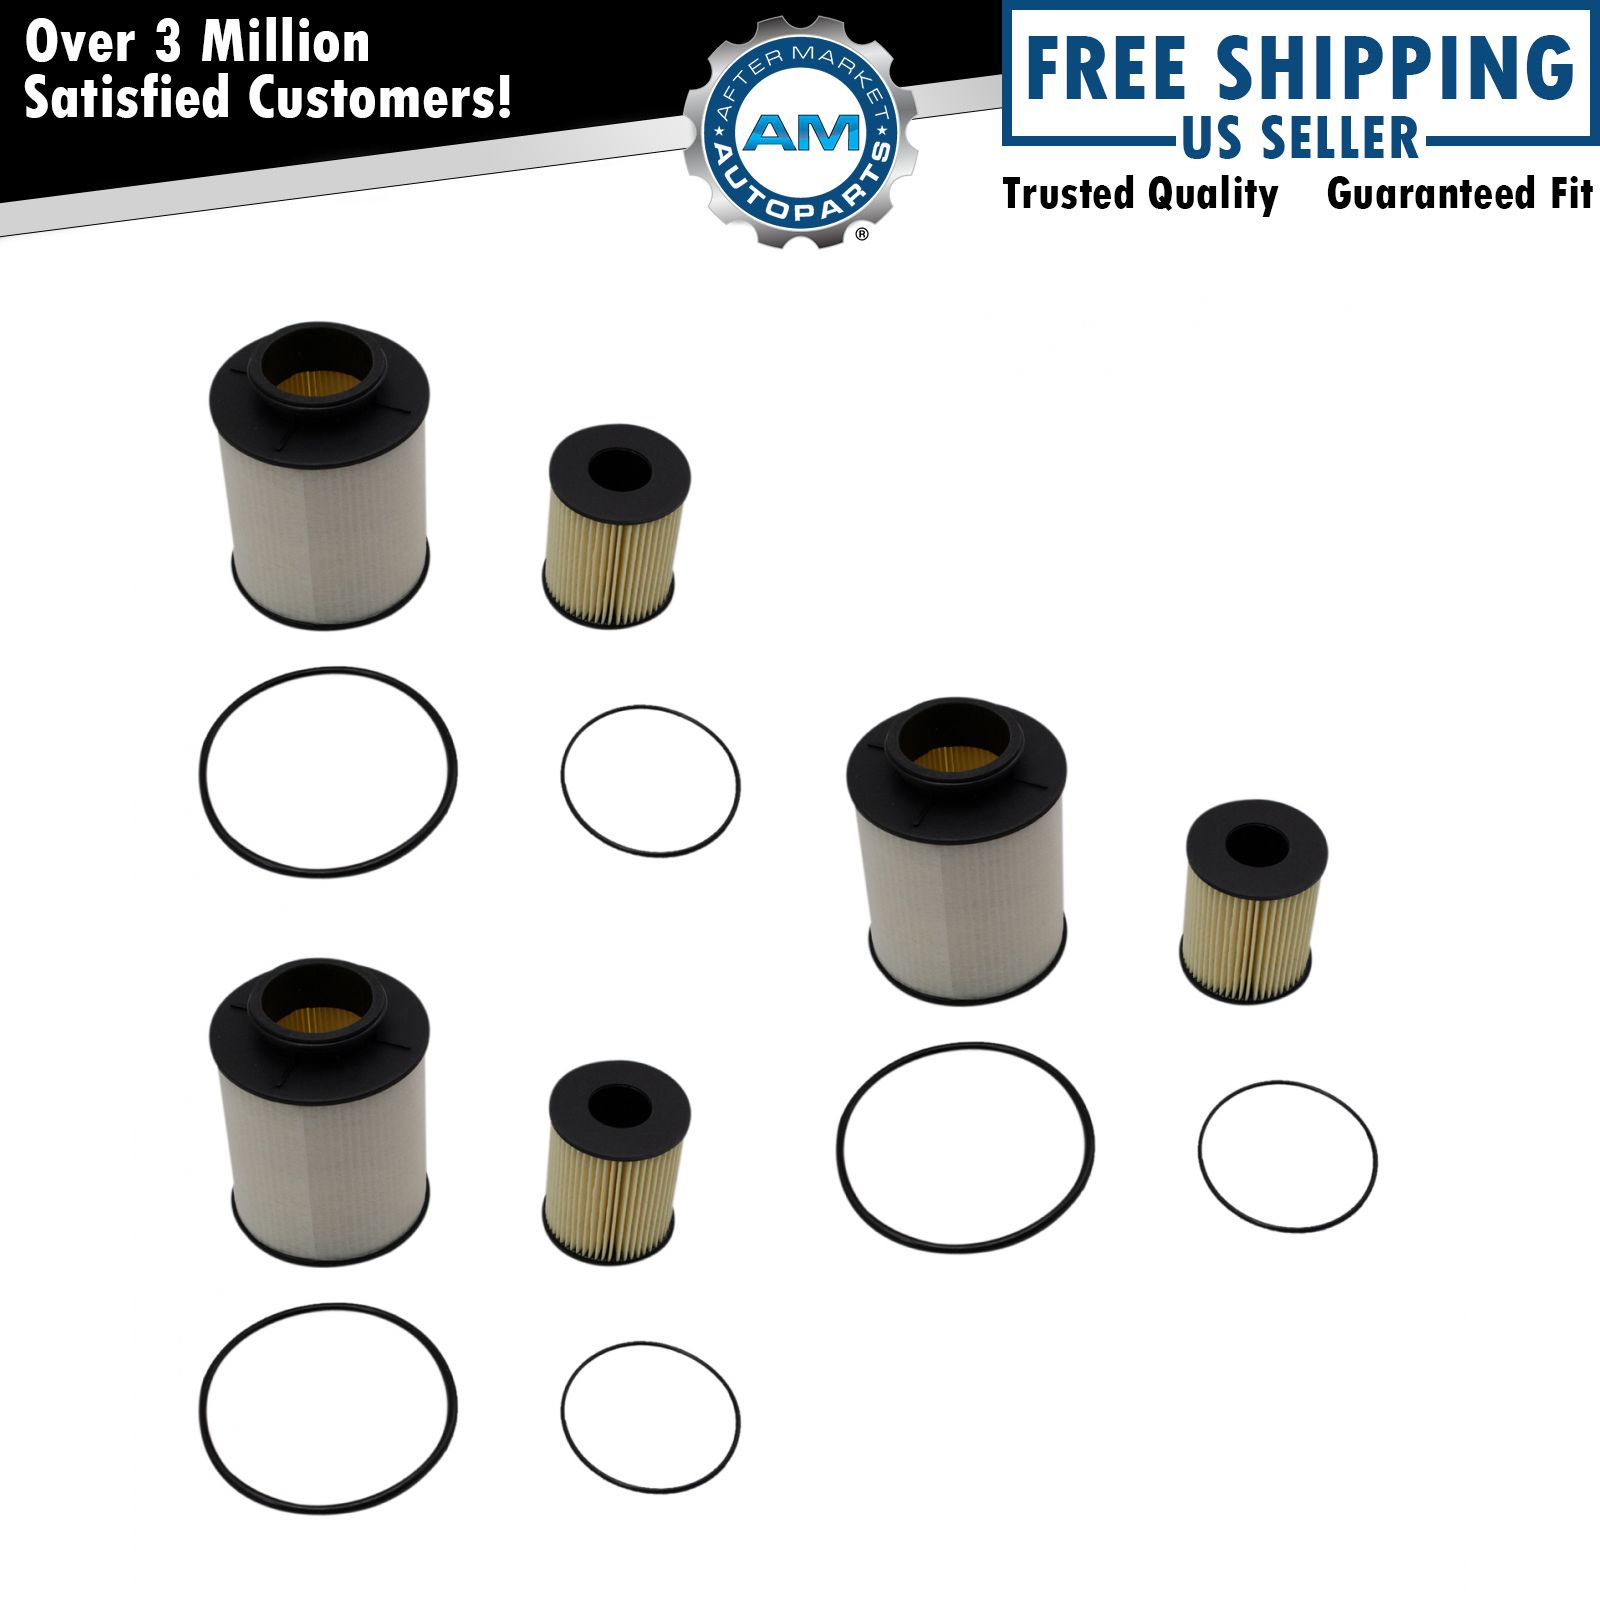 Ecogard 3 Piece Replacement Inline Cartridge Fuel Filter Kit for Ford Super Duty